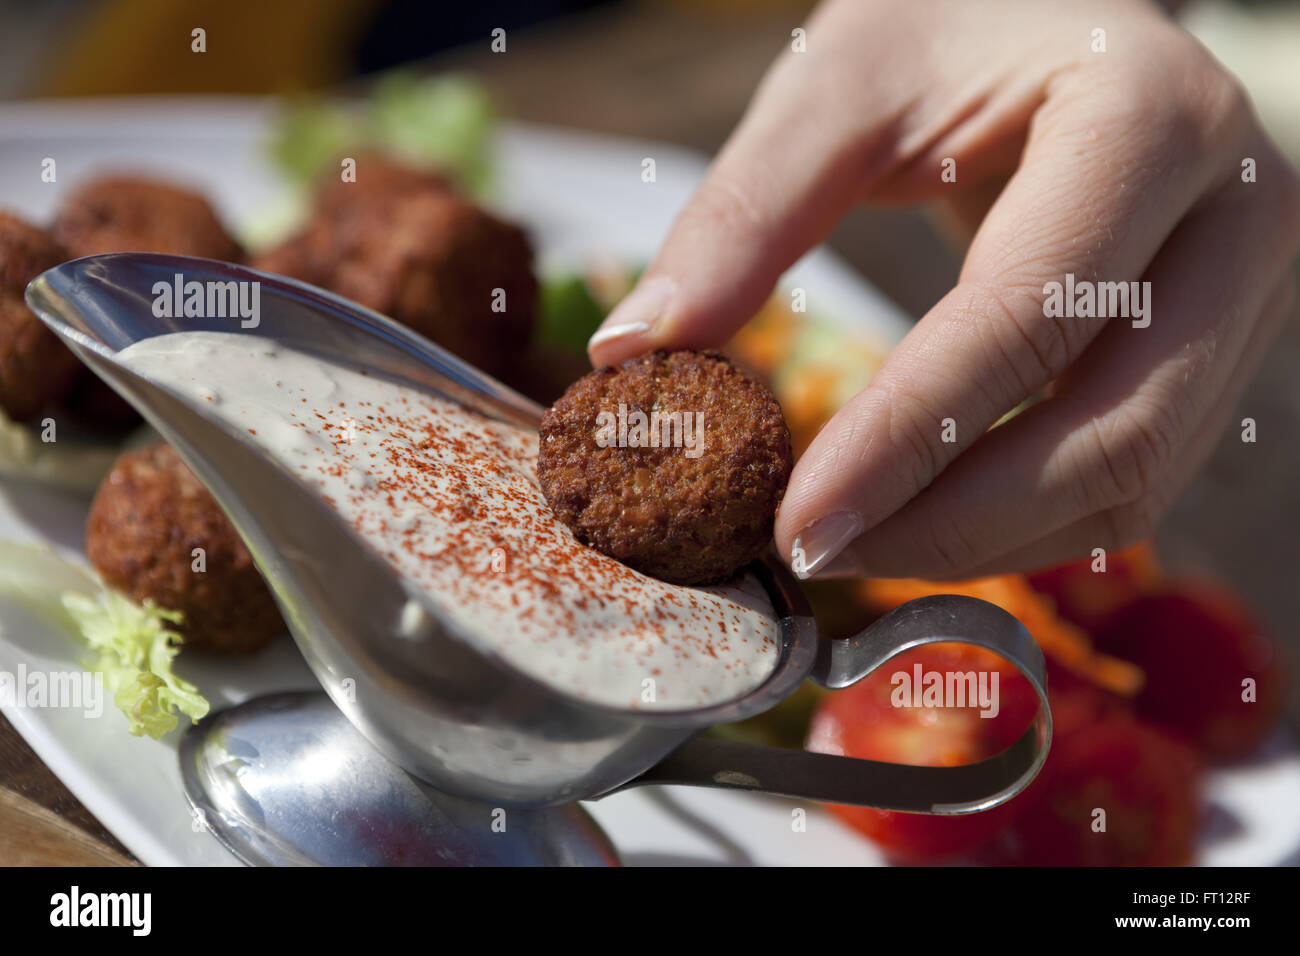 Meal of falafel and humous, Tel-Aviv, Israel, Asia Stock Photo